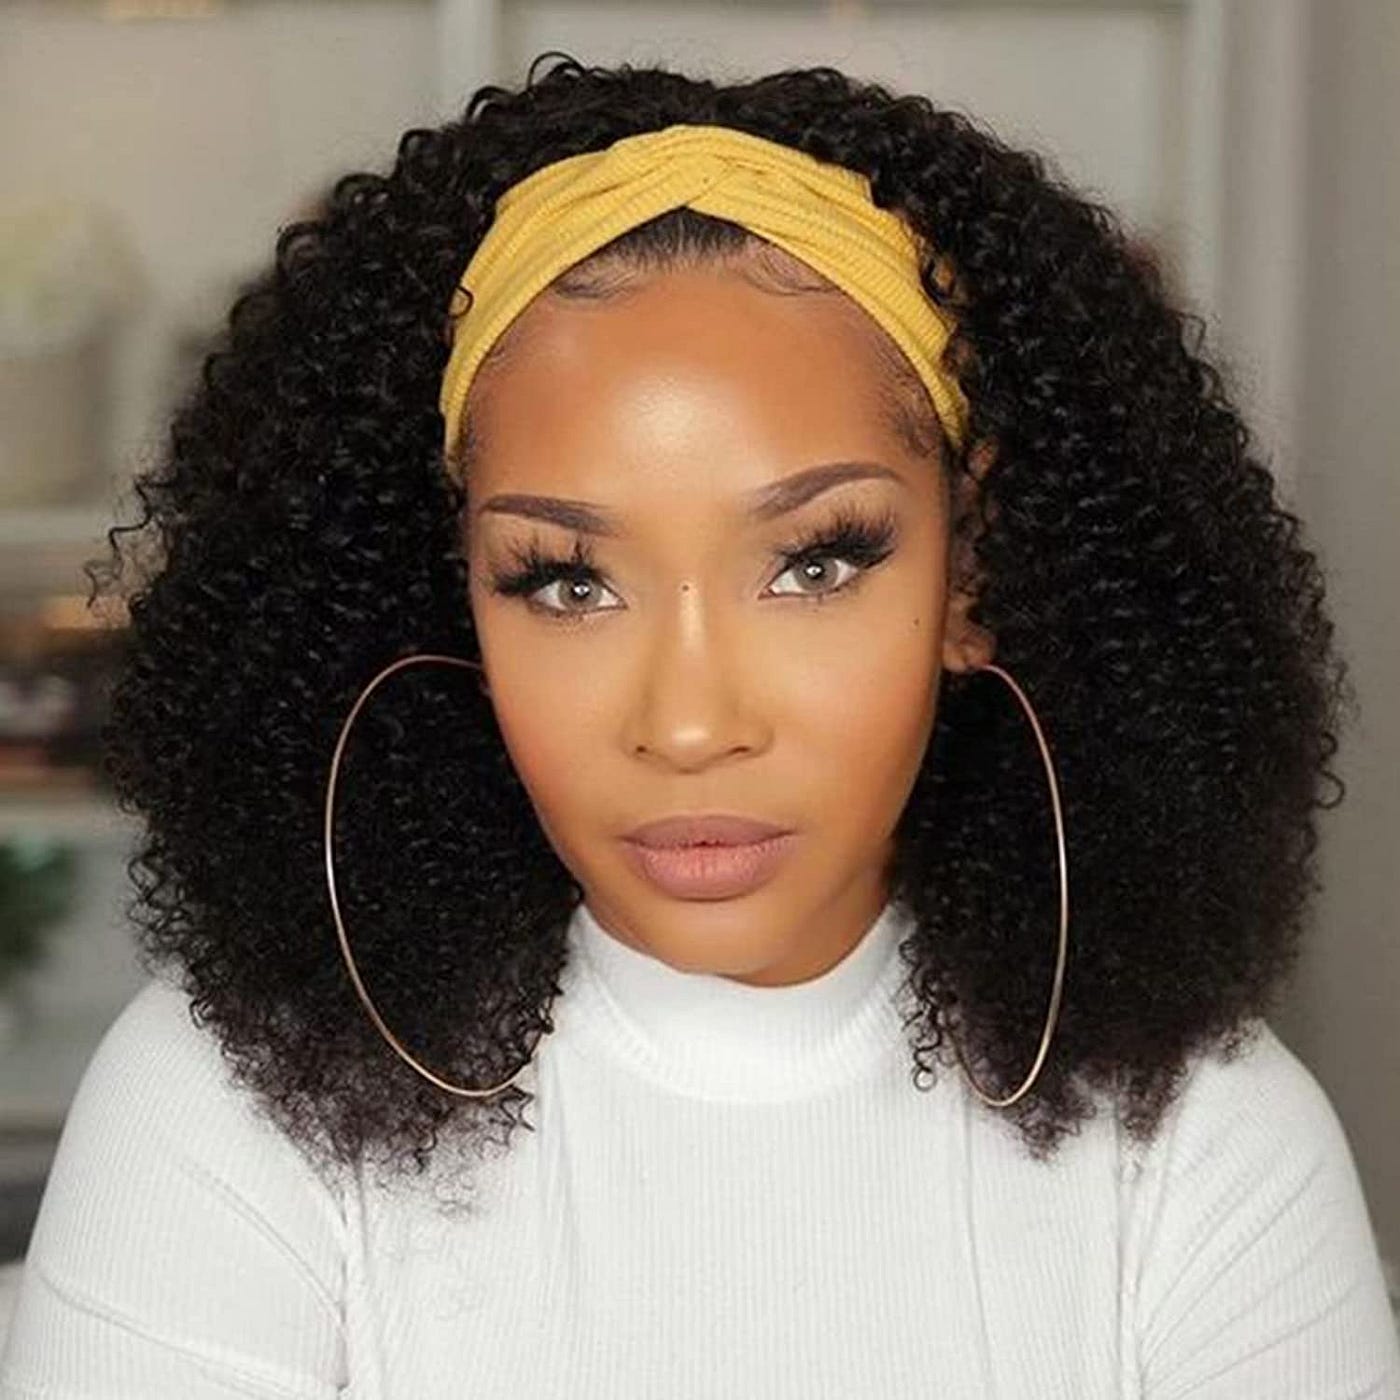 Q And A About HD Lace Frontal-Blog 